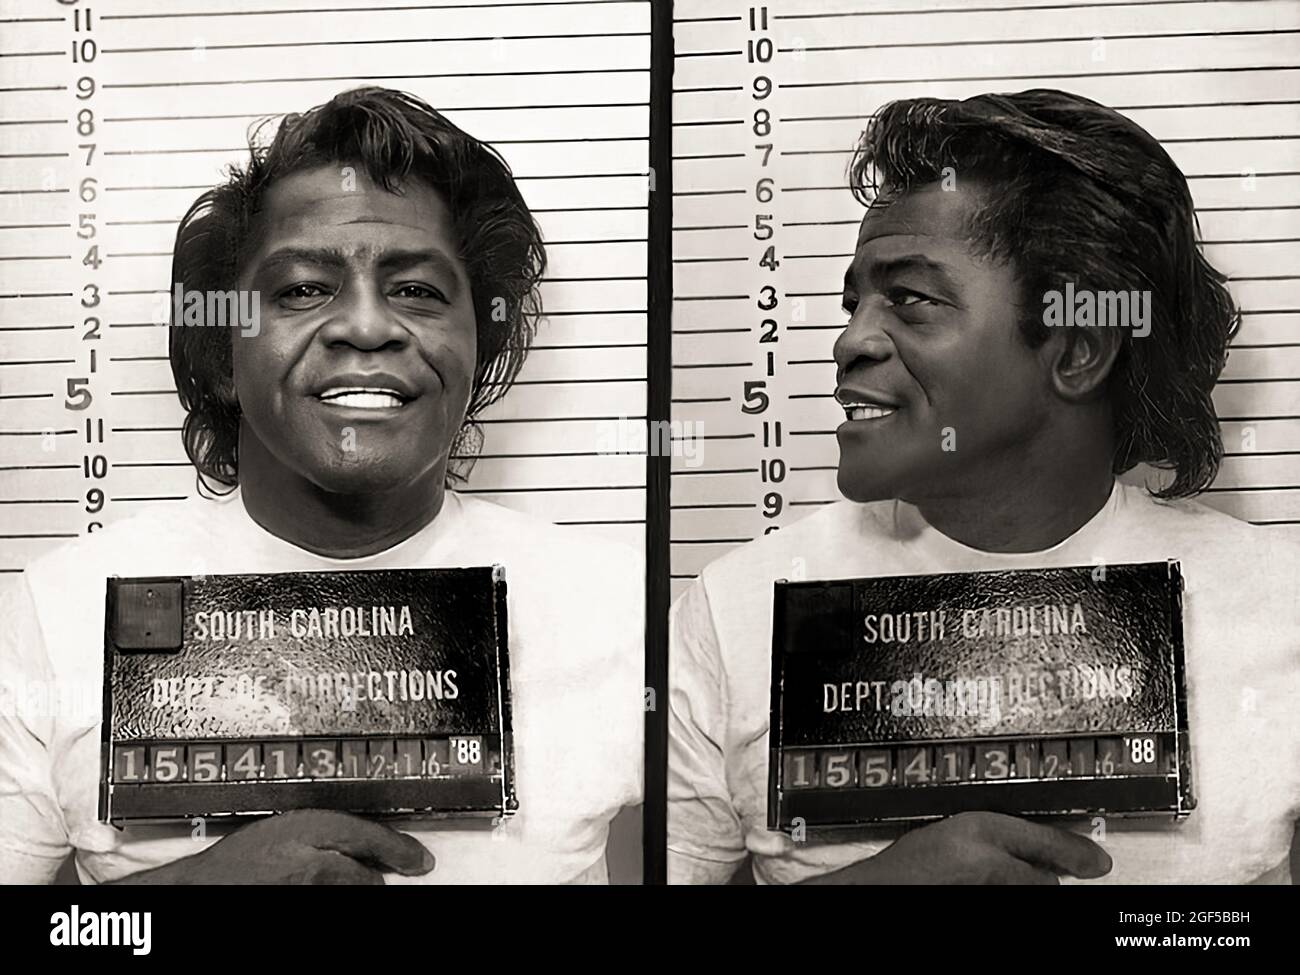 1988 , South Carolina , USA : The celebrated King of Soul Music JAMES BROWN ( 1933 - 2006 ) when was arrested by Police Department of South Carolina in the official mug-shot . On this day, Dec. 15, in 1988, James Brown began serving a six-year sentence for carrying a deadly weapon at a public gathering, attempting to flee police, and driving under the influence of drugs . Rumors of a PCP habit had already surfaced by the time his erratic behavior came to a head in September, when he reportedly stormed into the insurance company next to his office, waving a shotgun and complaining that “strange Stock Photo